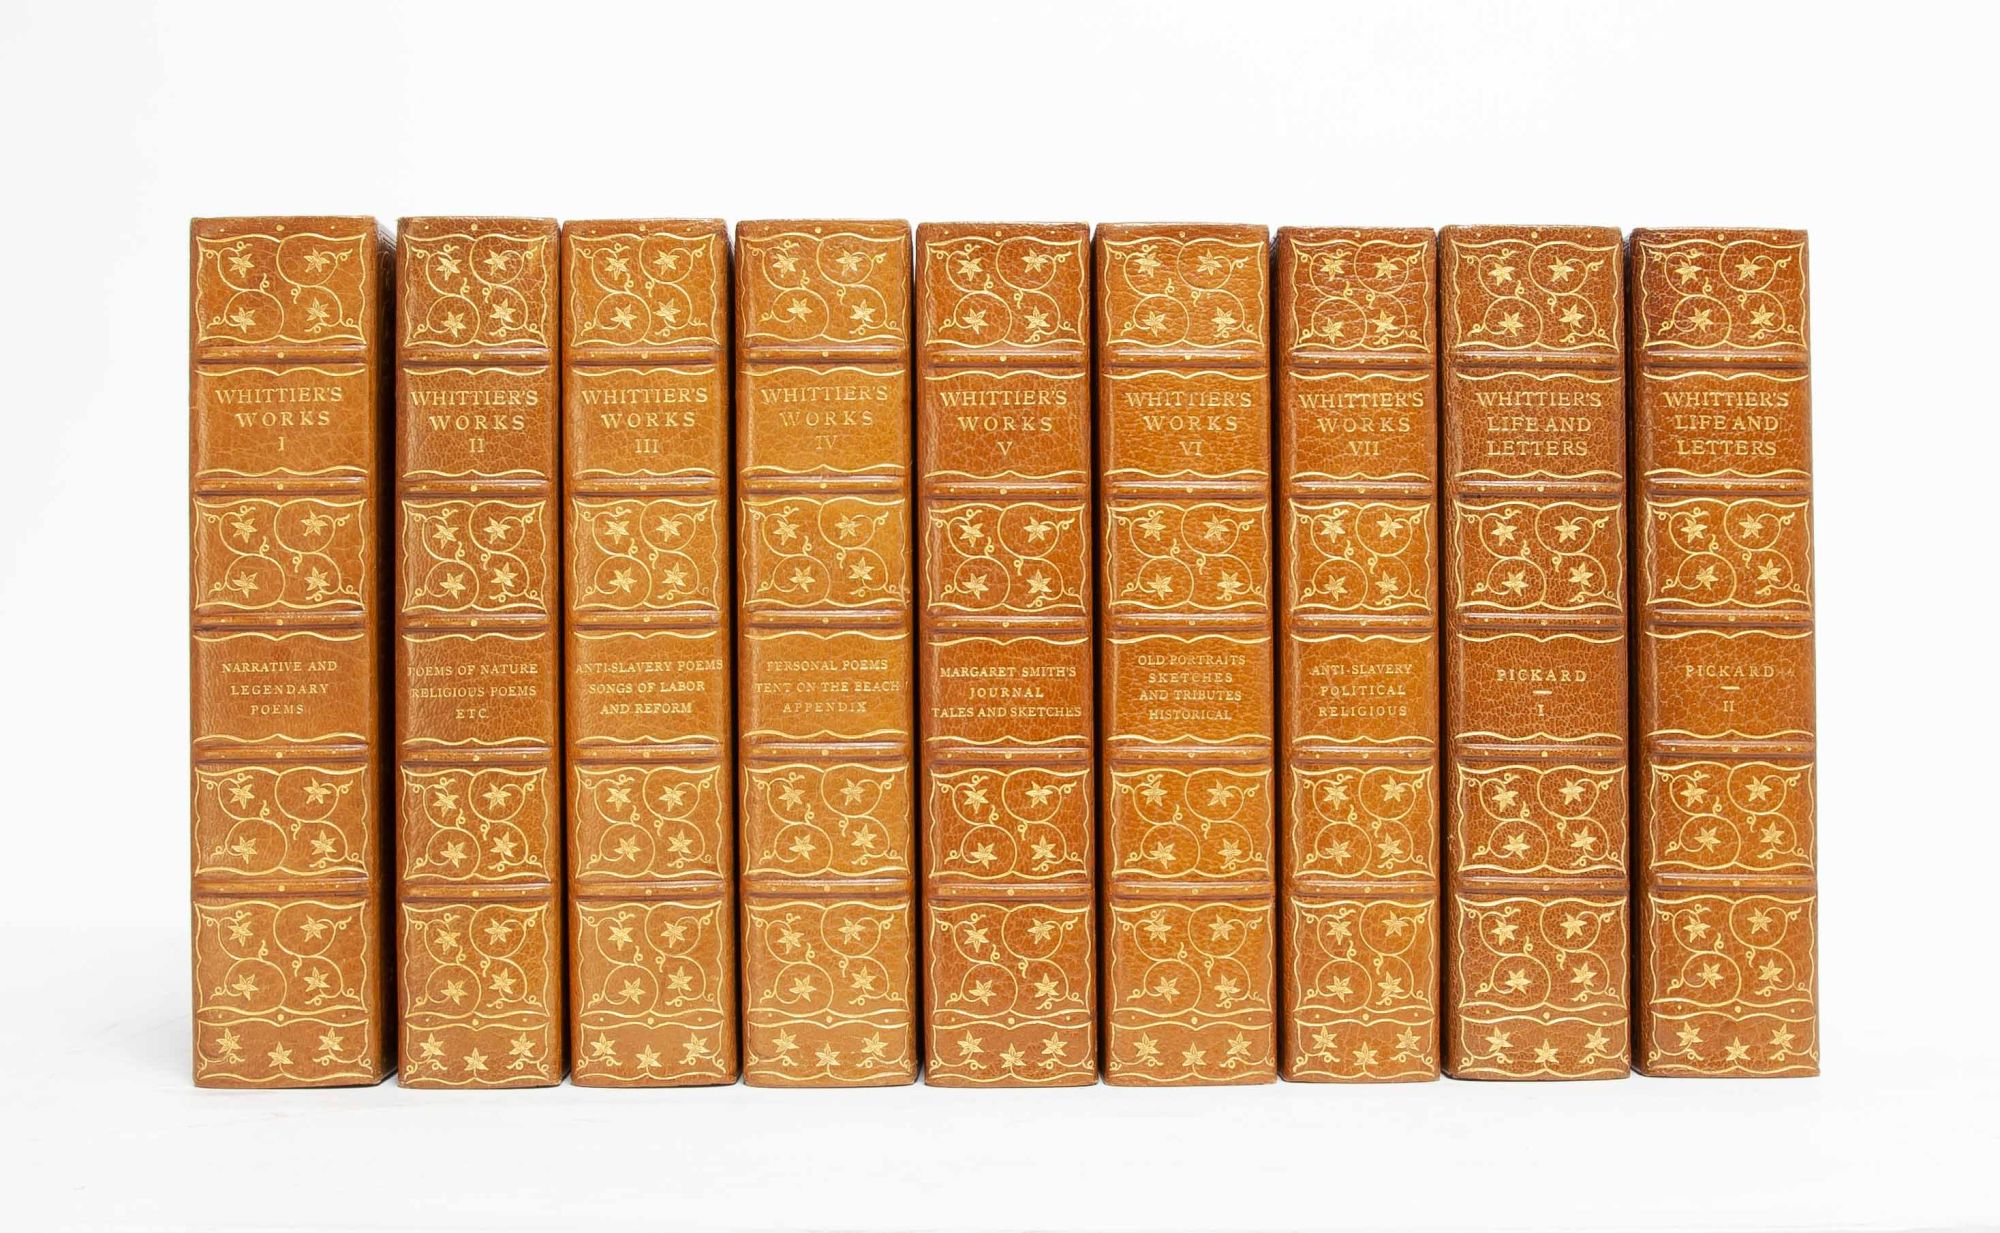 (Item #5182) The Poetical Works of John Greenleaf Whittier [with] Life and Letters of... (Artist's Edition in 9 vols.). John Greenleaf Whittier.